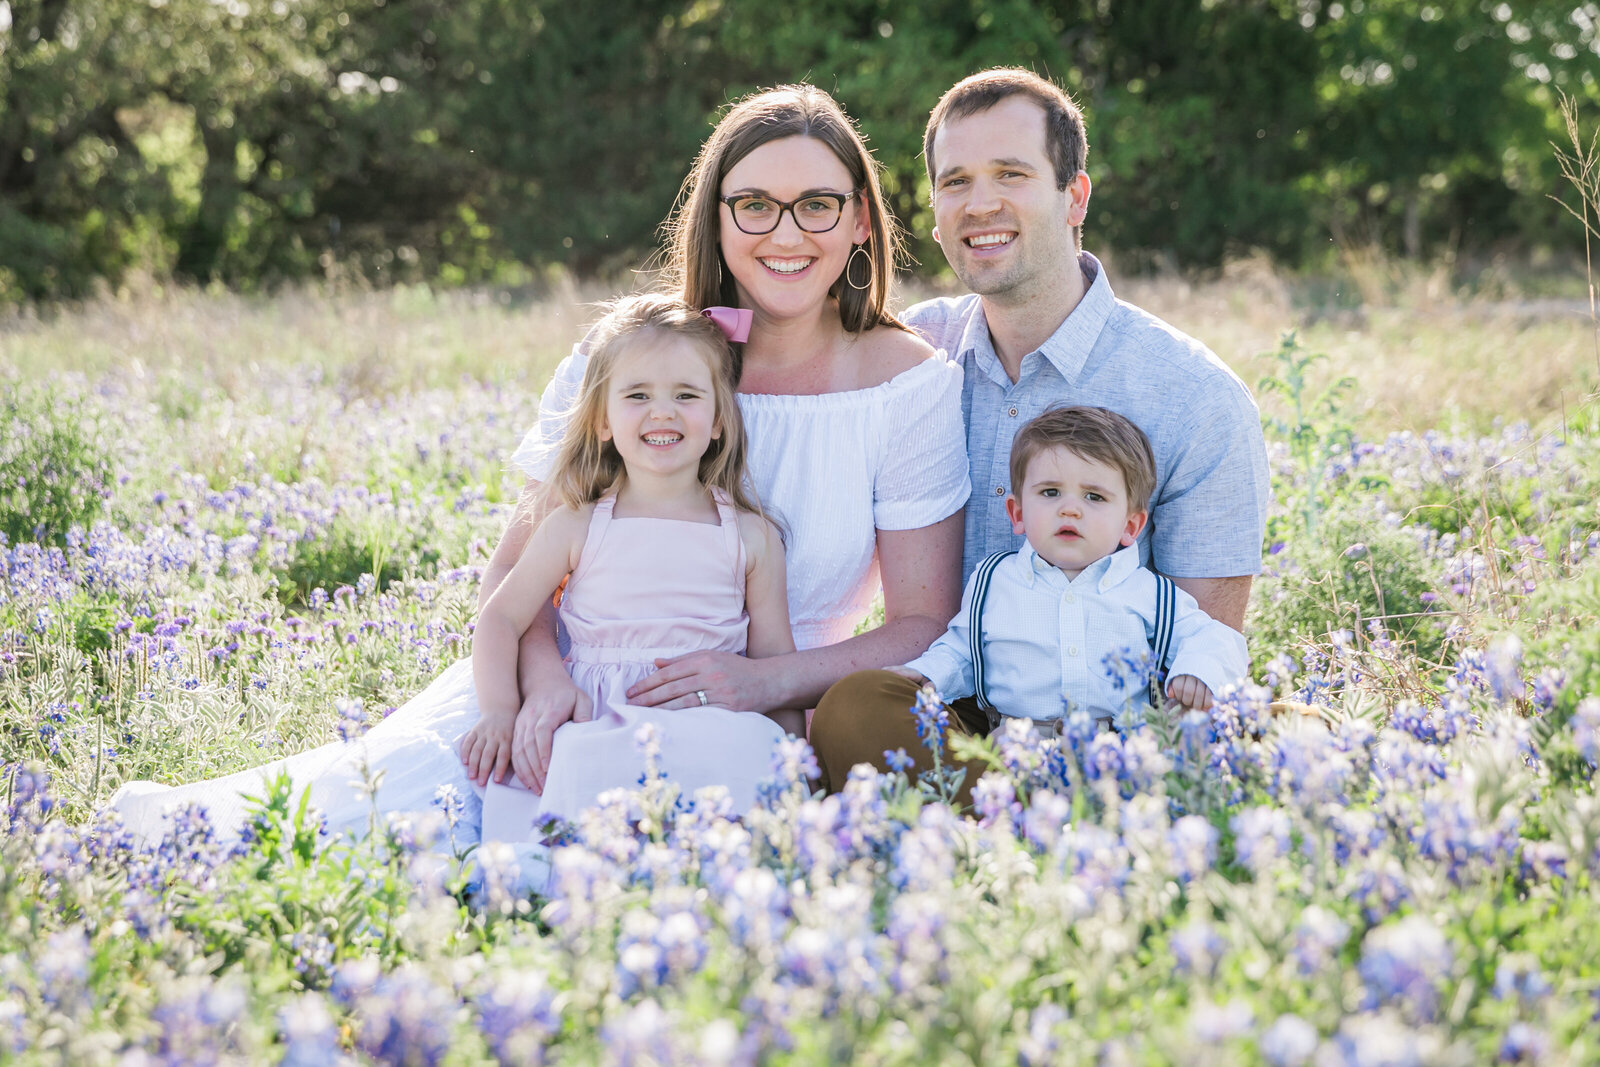 Austin Family Photographer, Tiffany Chapman Photography family smiling in bluebonnets photo